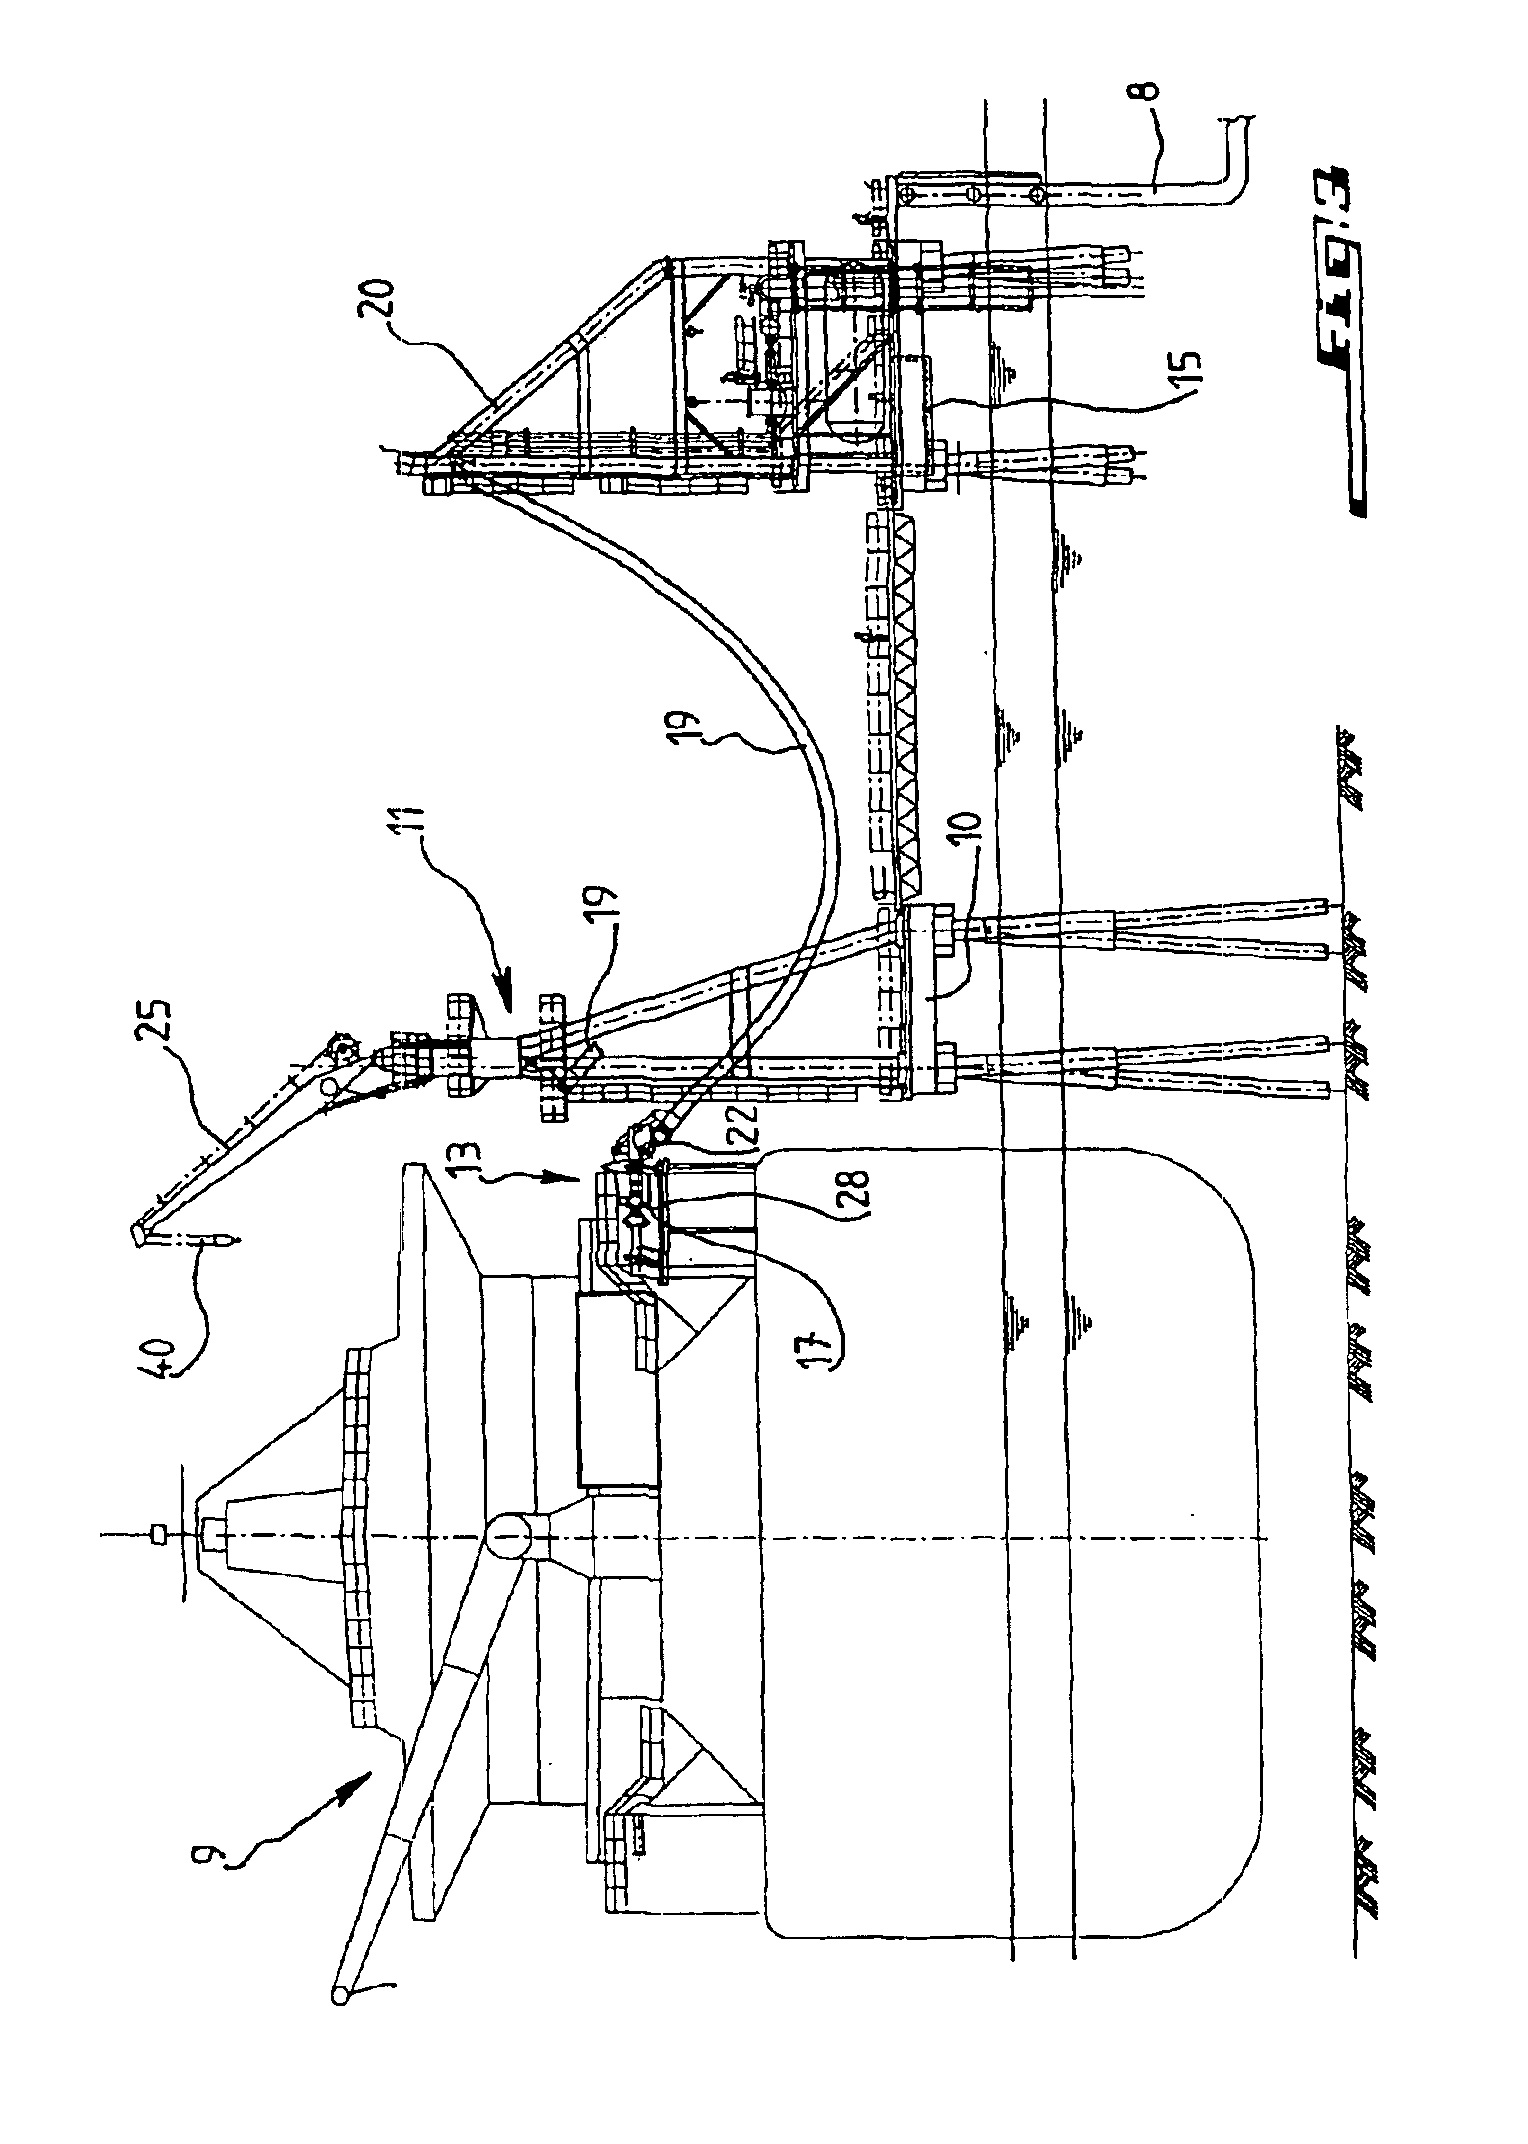 System for transferring a fluid product between a carrying vessel and a shore installation